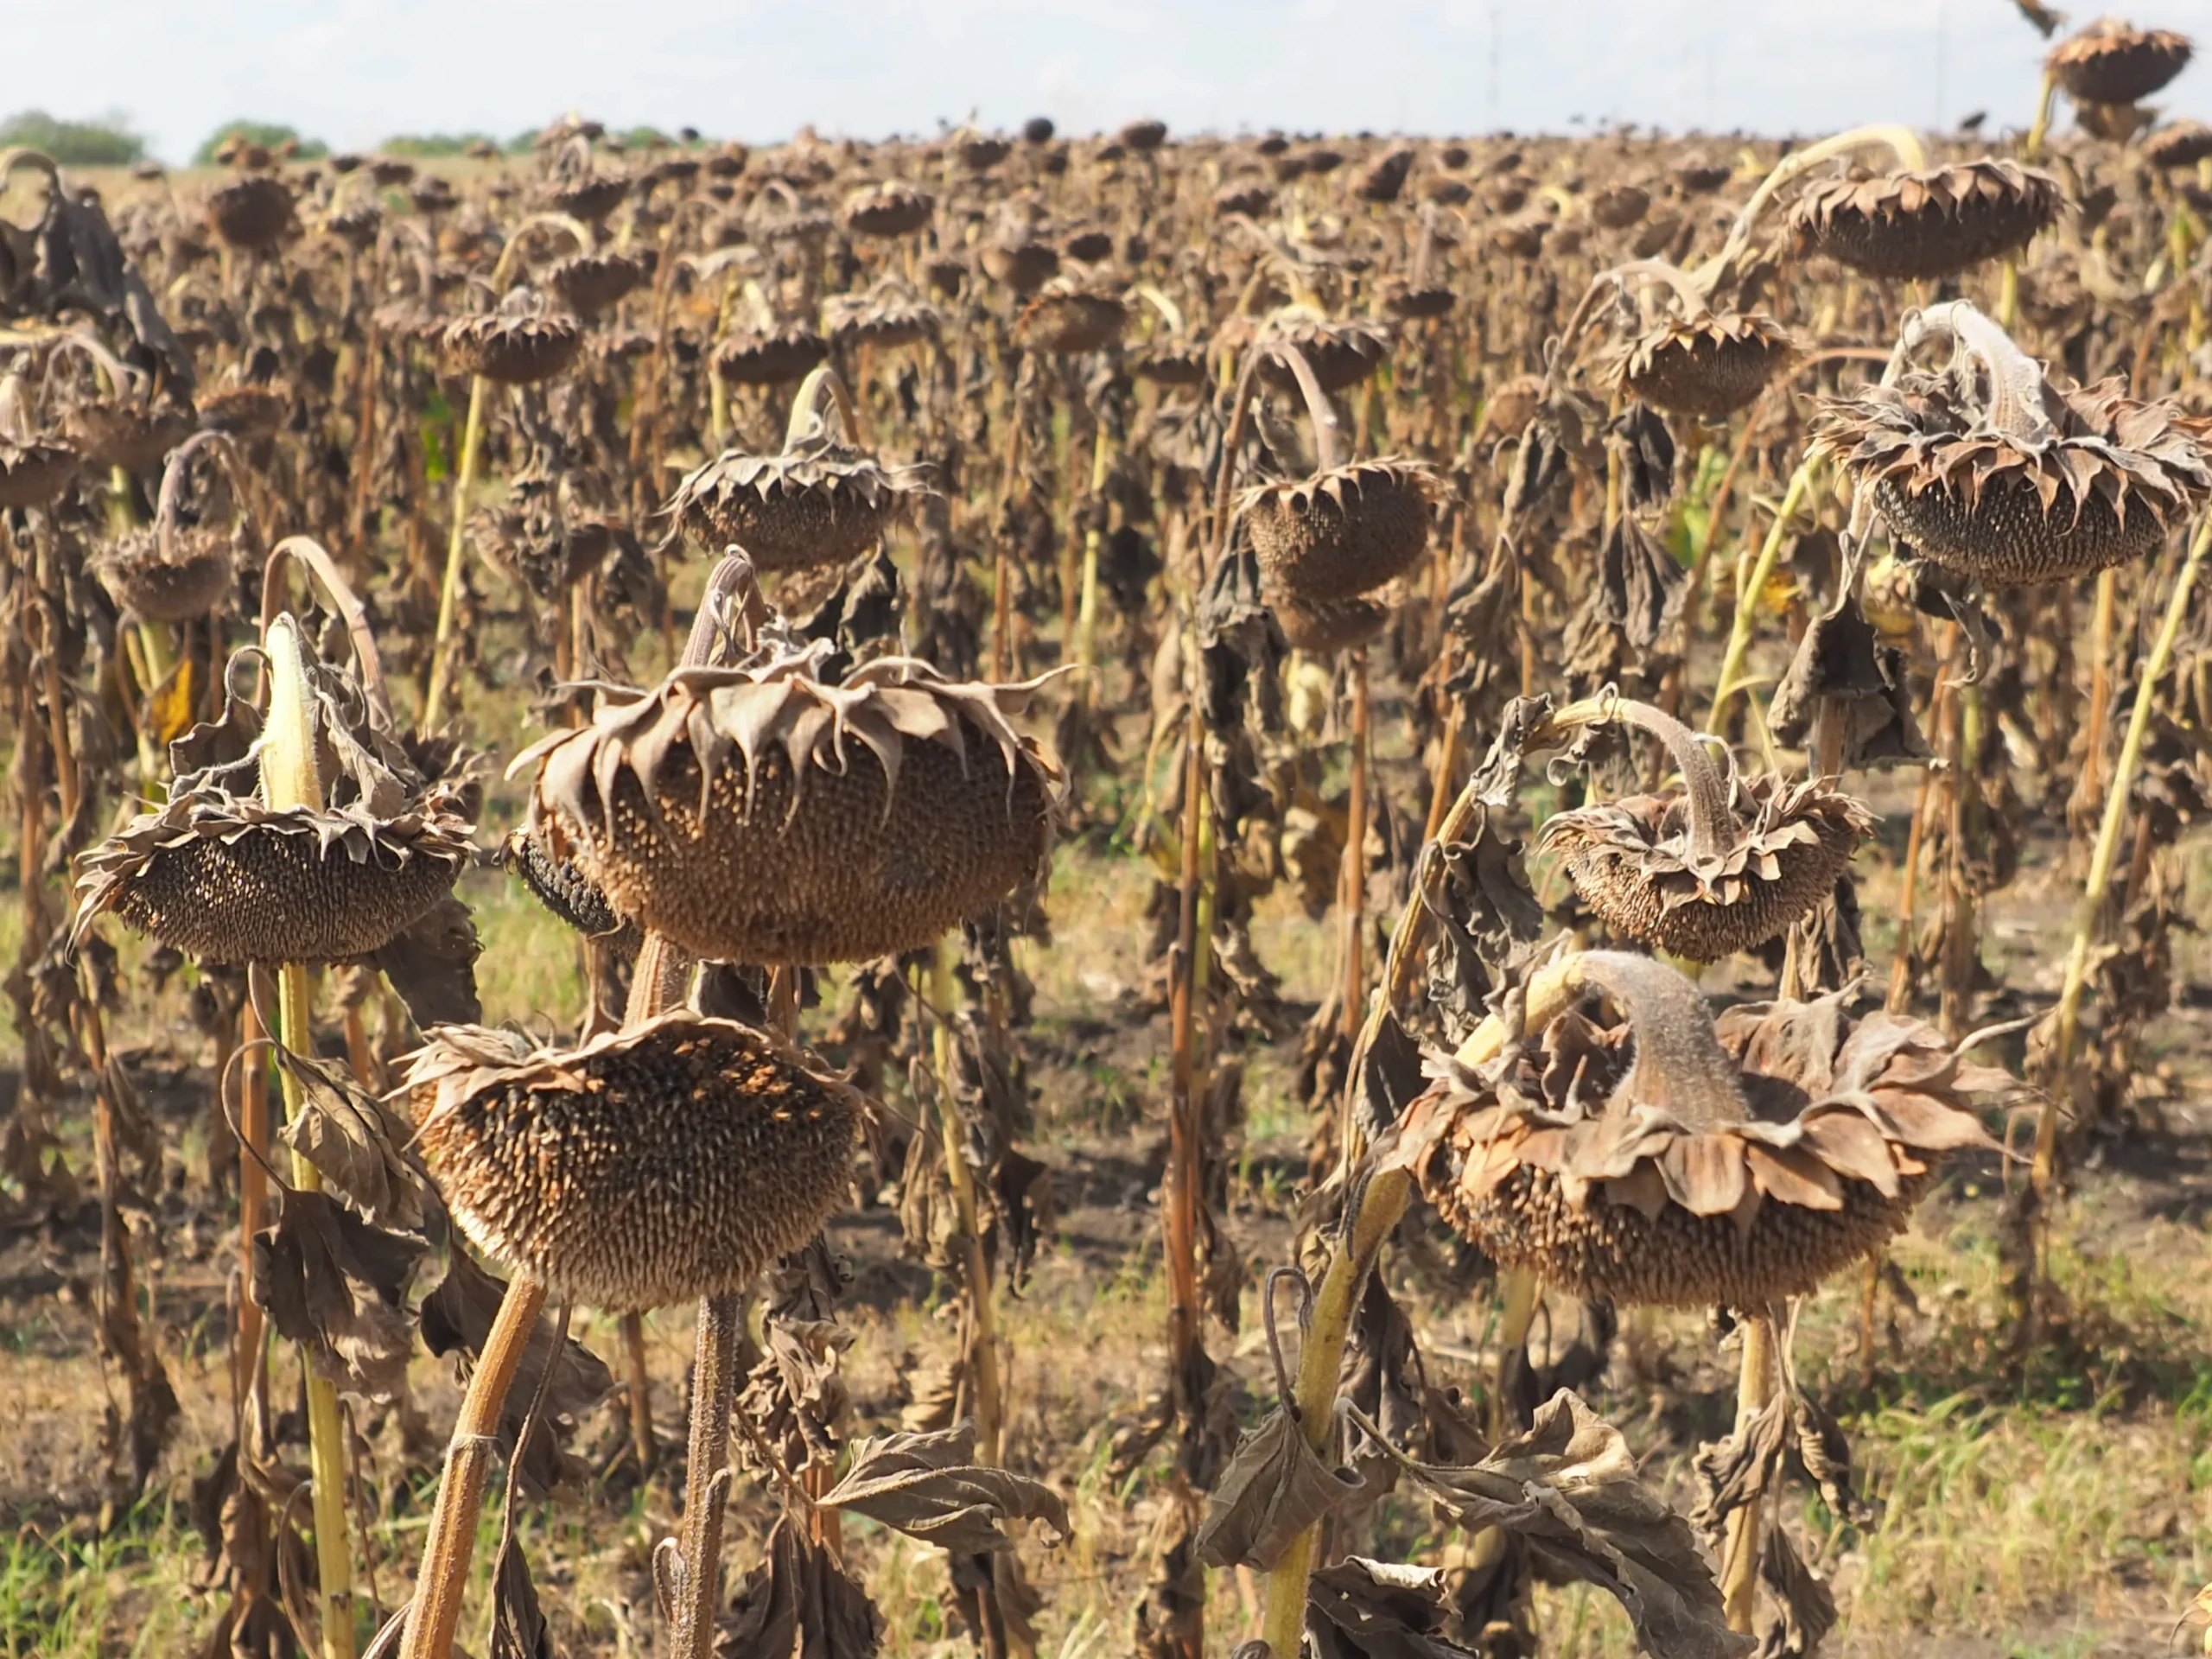 Dried-out sunflowers are ready for harvesting when the moisture content is about 8–9%.